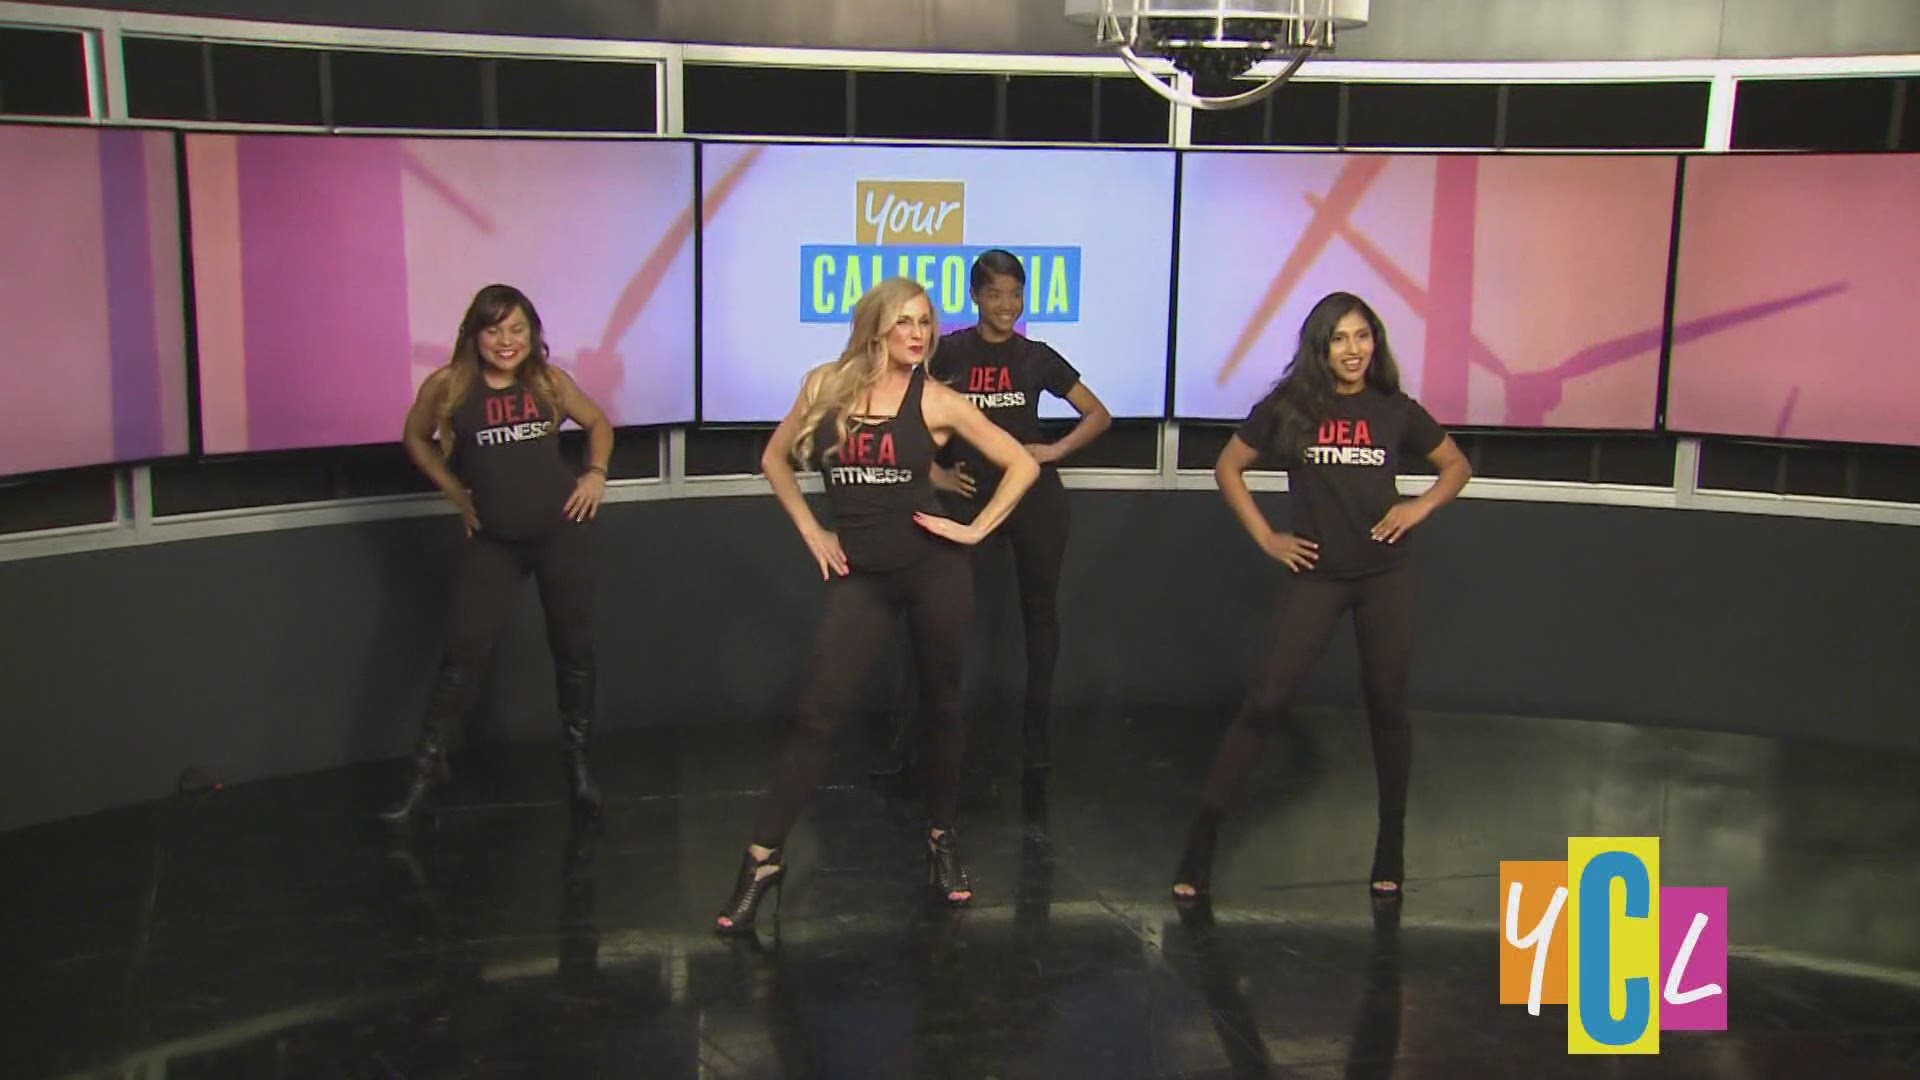 Dancing in heels is a current fitness trend and we’ve got quite the performance for you!